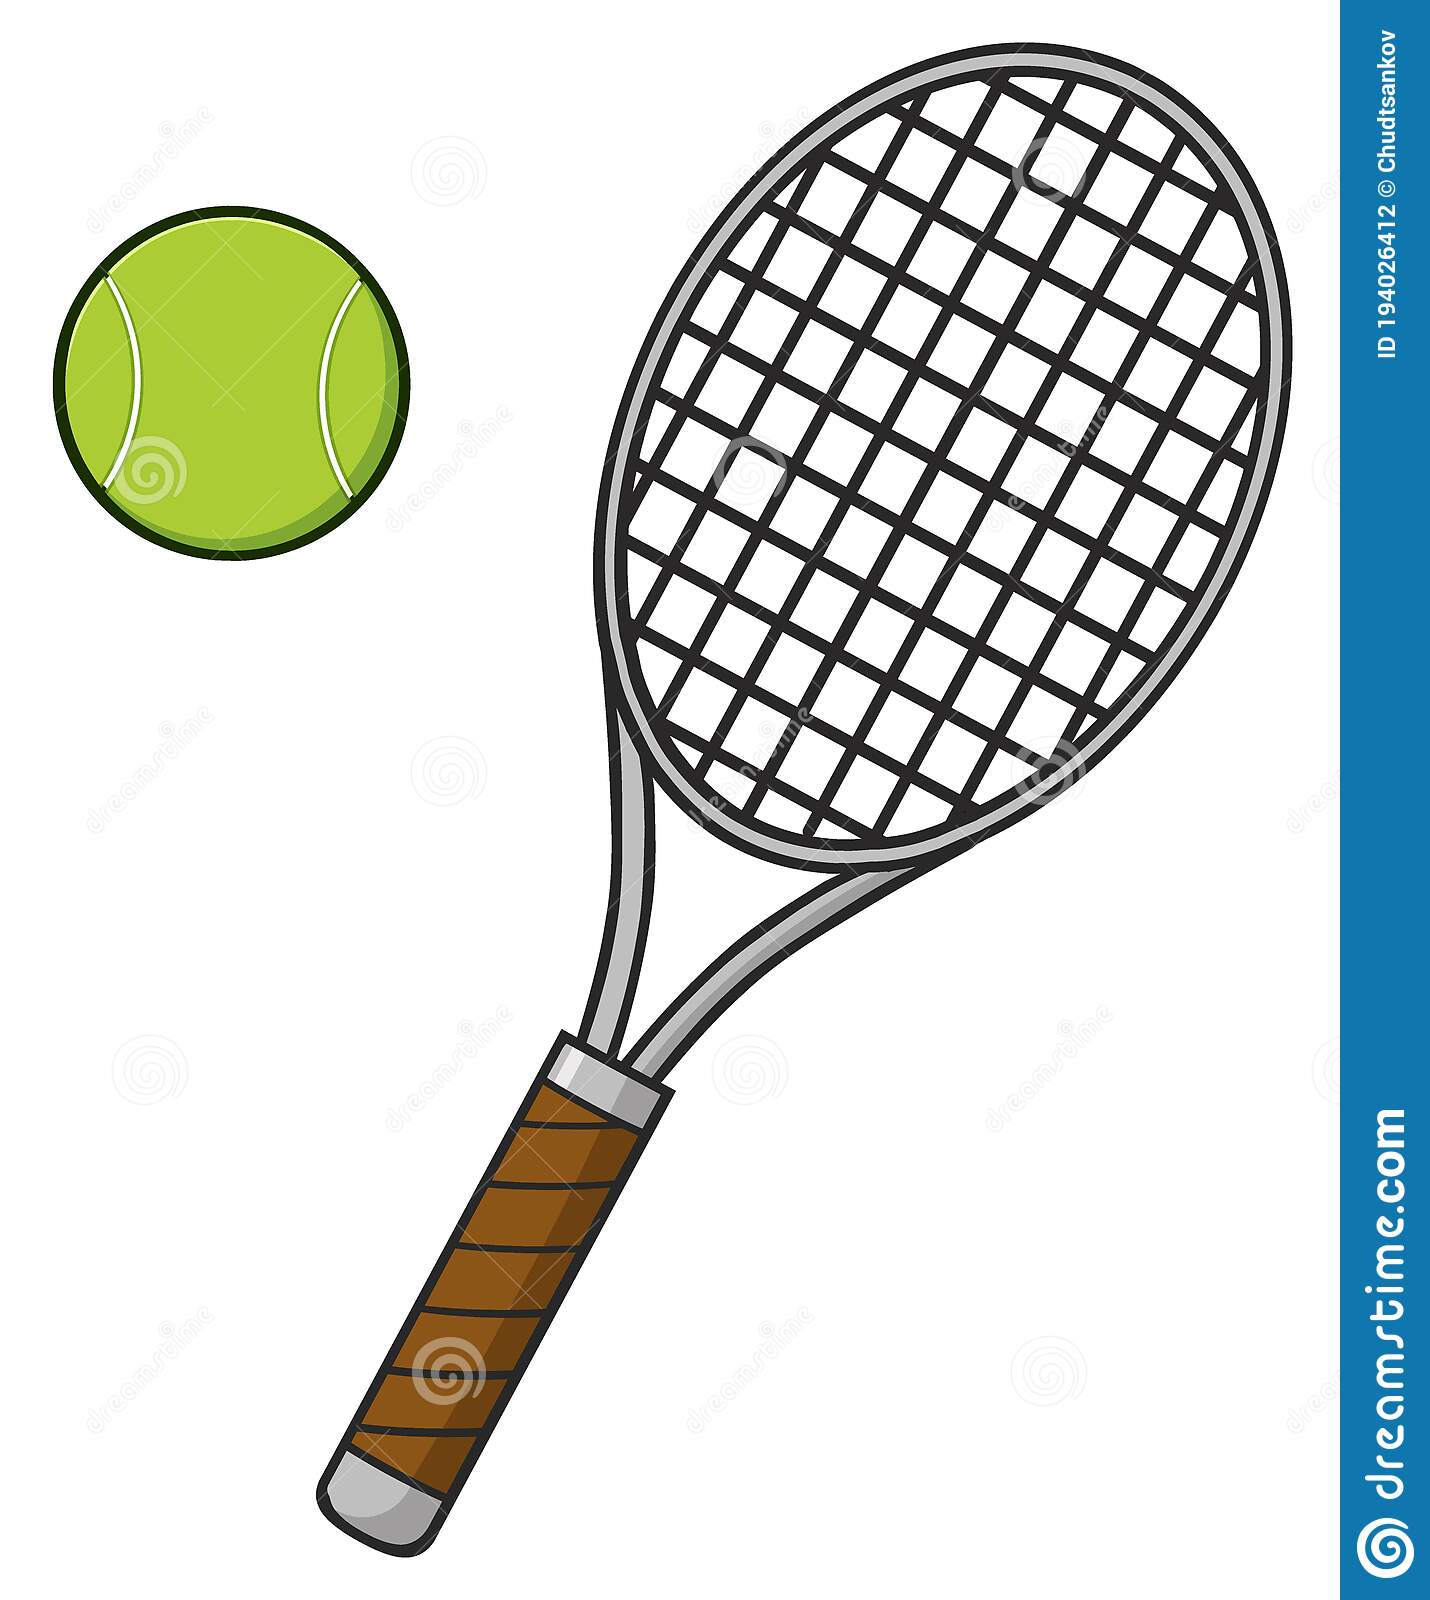 Detail Image Of Tennis Racket And Ball Nomer 19